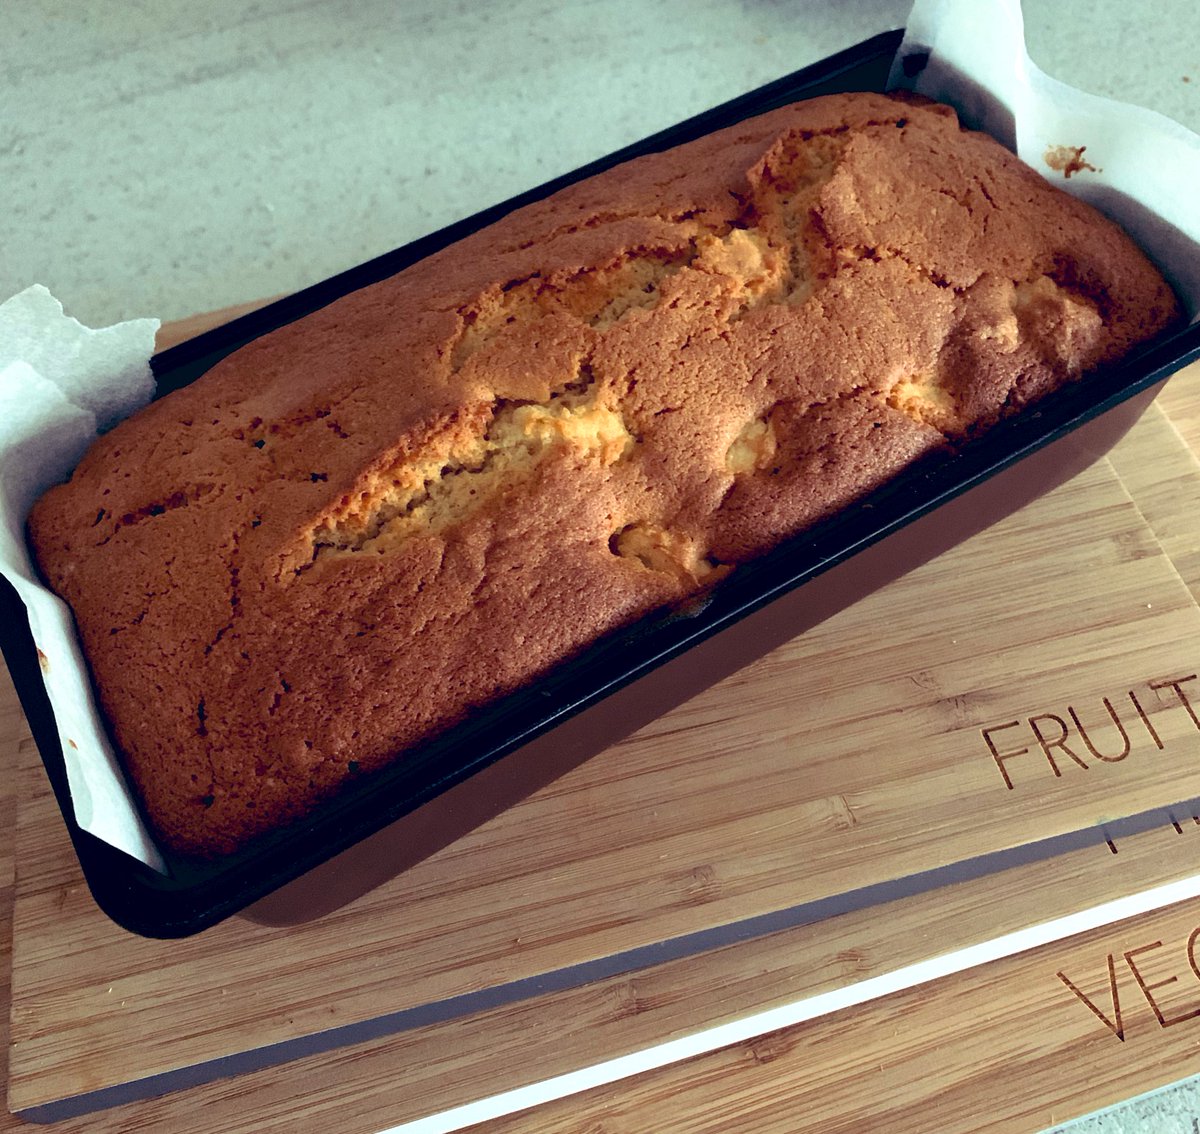 Spot of Sunday baking! Apple and cinnamon loaf, once it’s cooled it will get a nice coating of salted caramel sauce! #baking #homebaker #appleloaf #starbaker #sunday #SundayMotivation #sundayvibes #weekendvibes